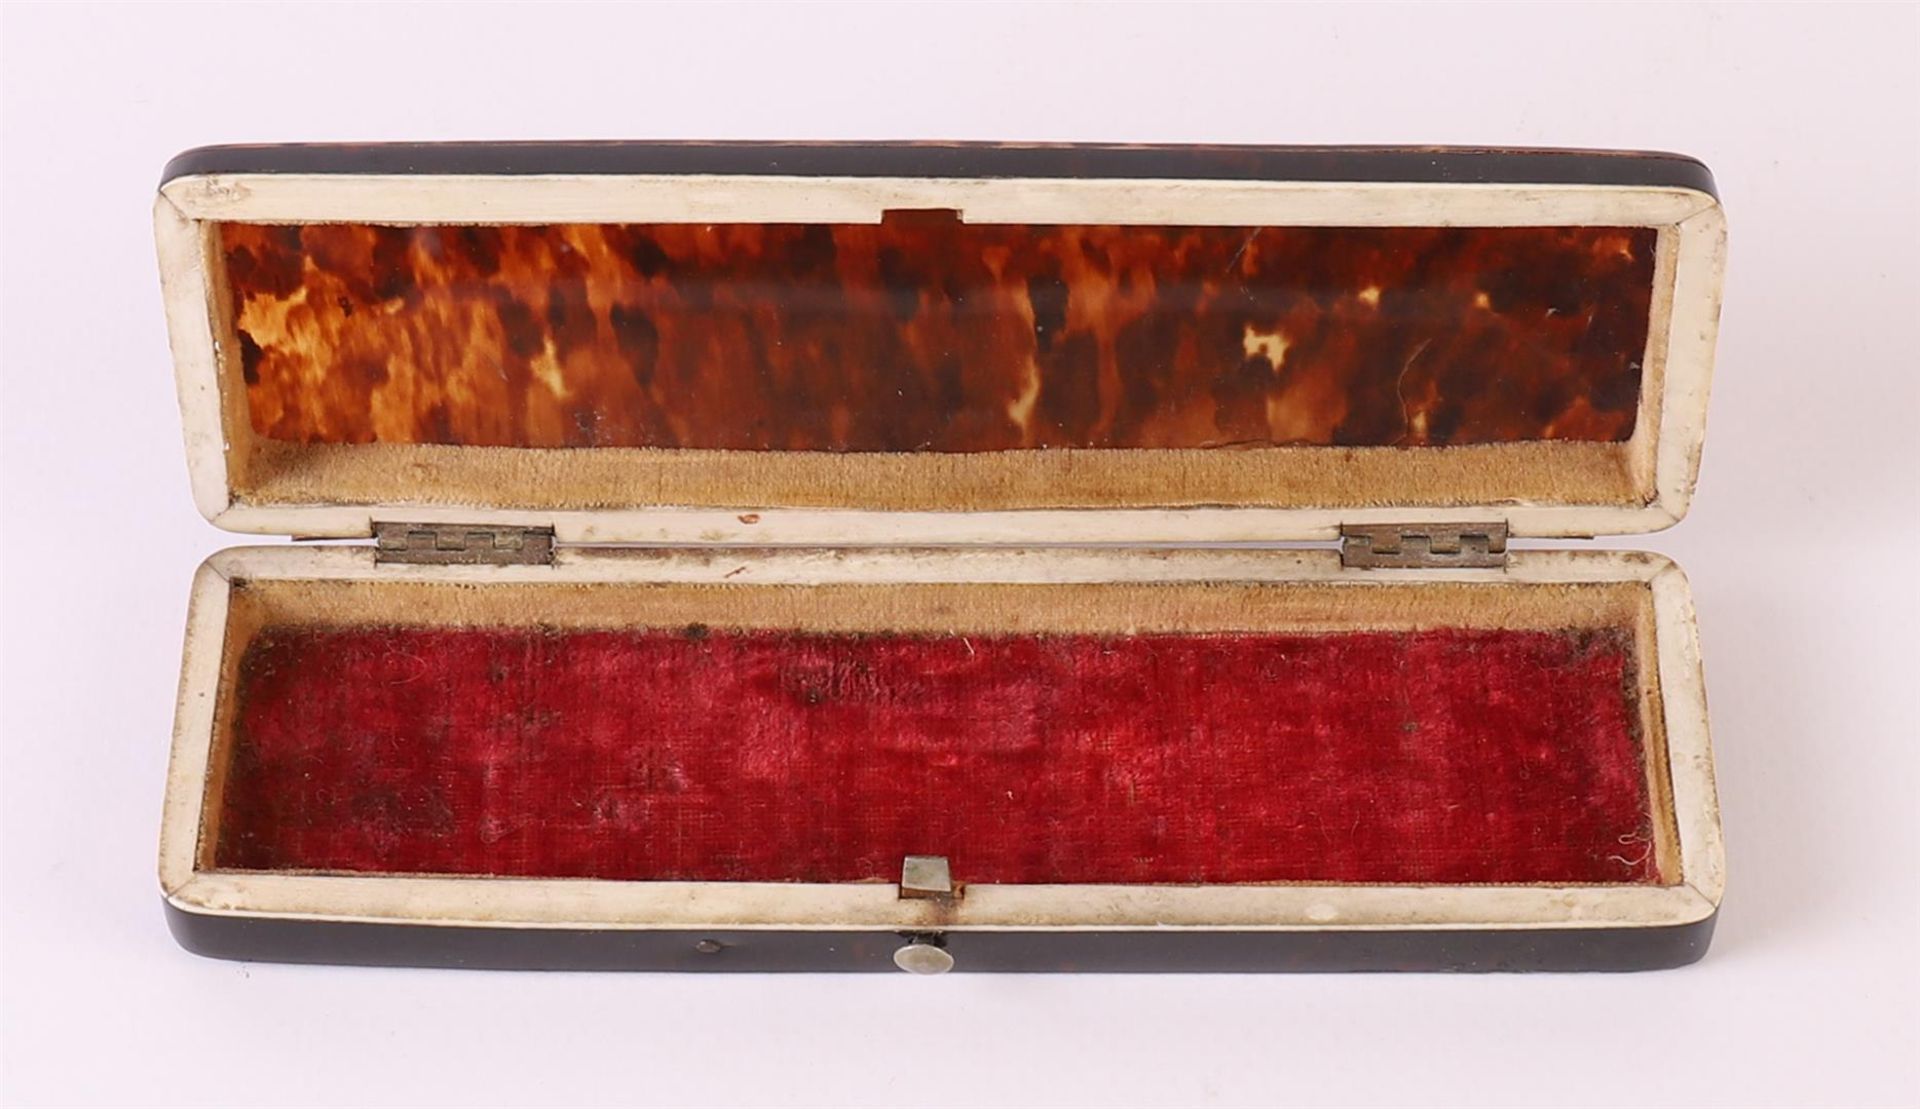 A rectangular tortoiseshell spectacle case containing glasses, late 19th century - Image 4 of 5